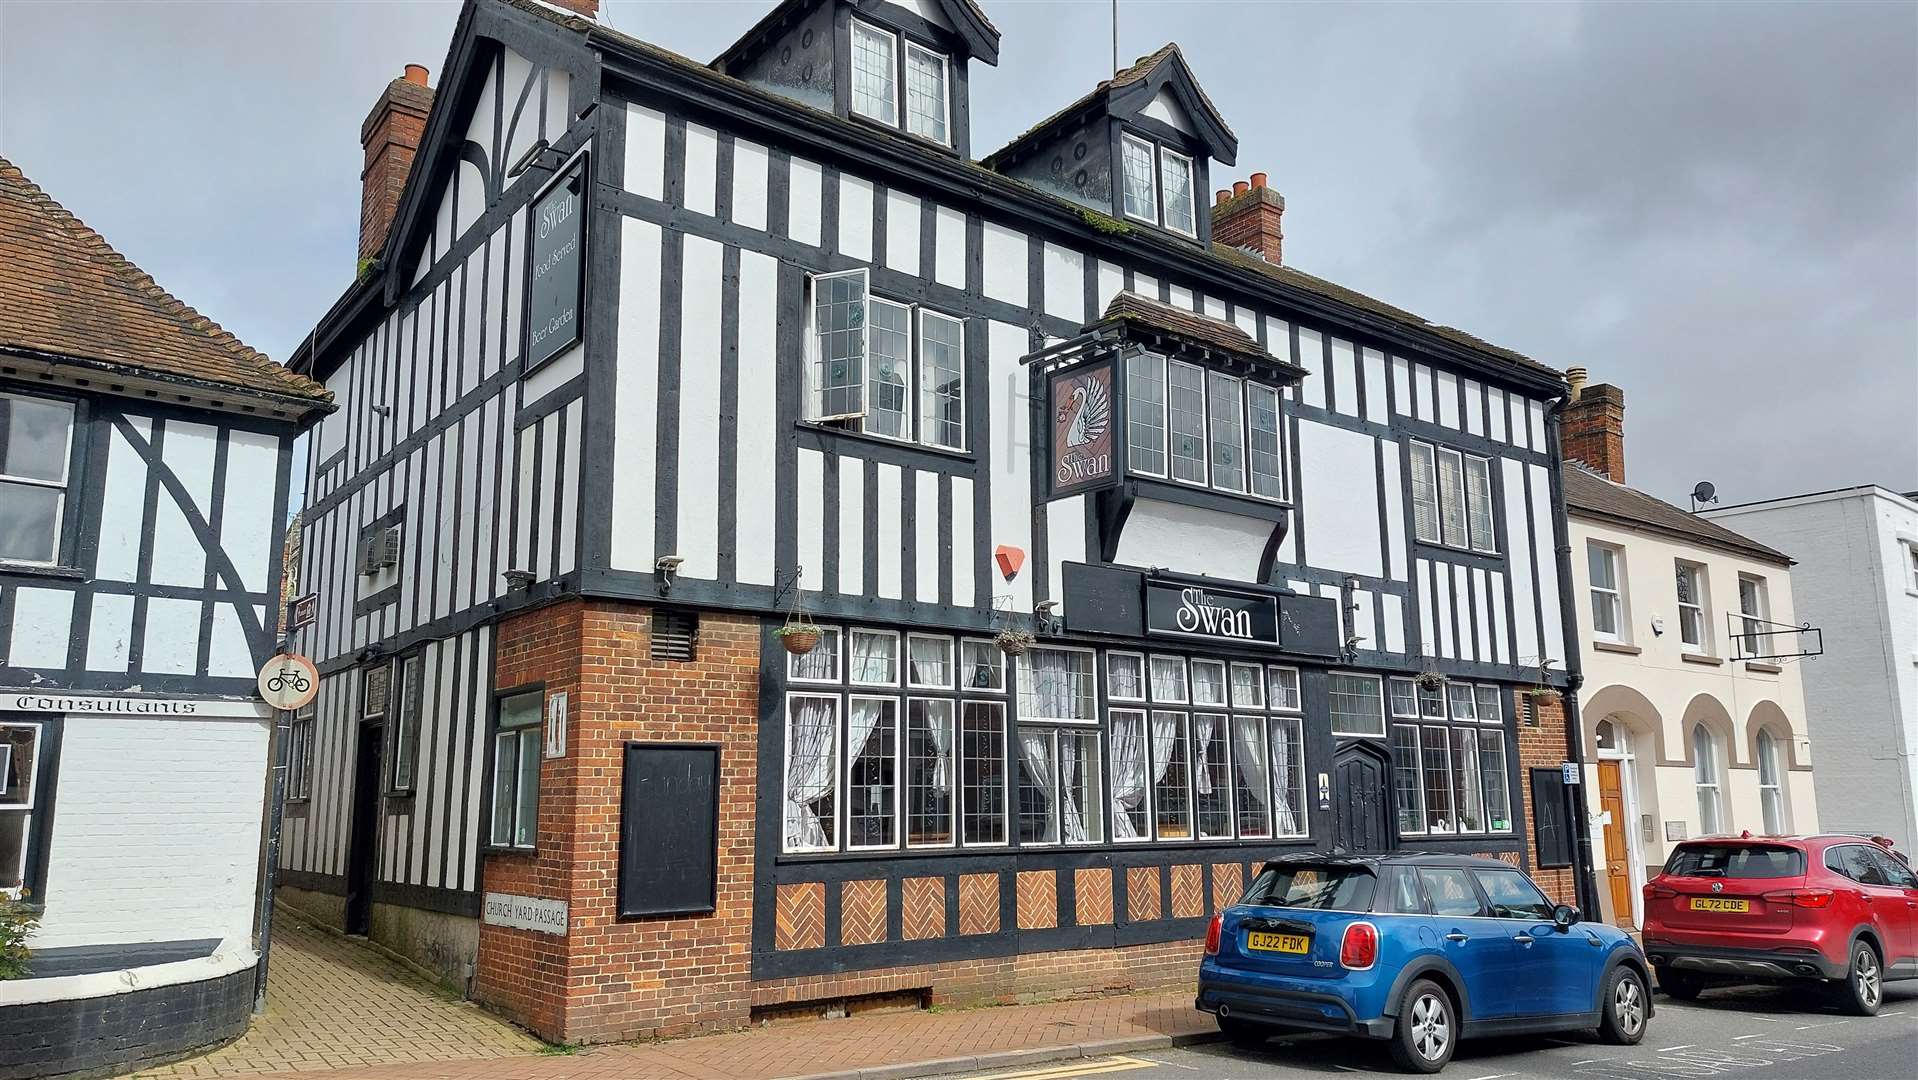 The council has given the green light to turn The Swan into a four bedroom home